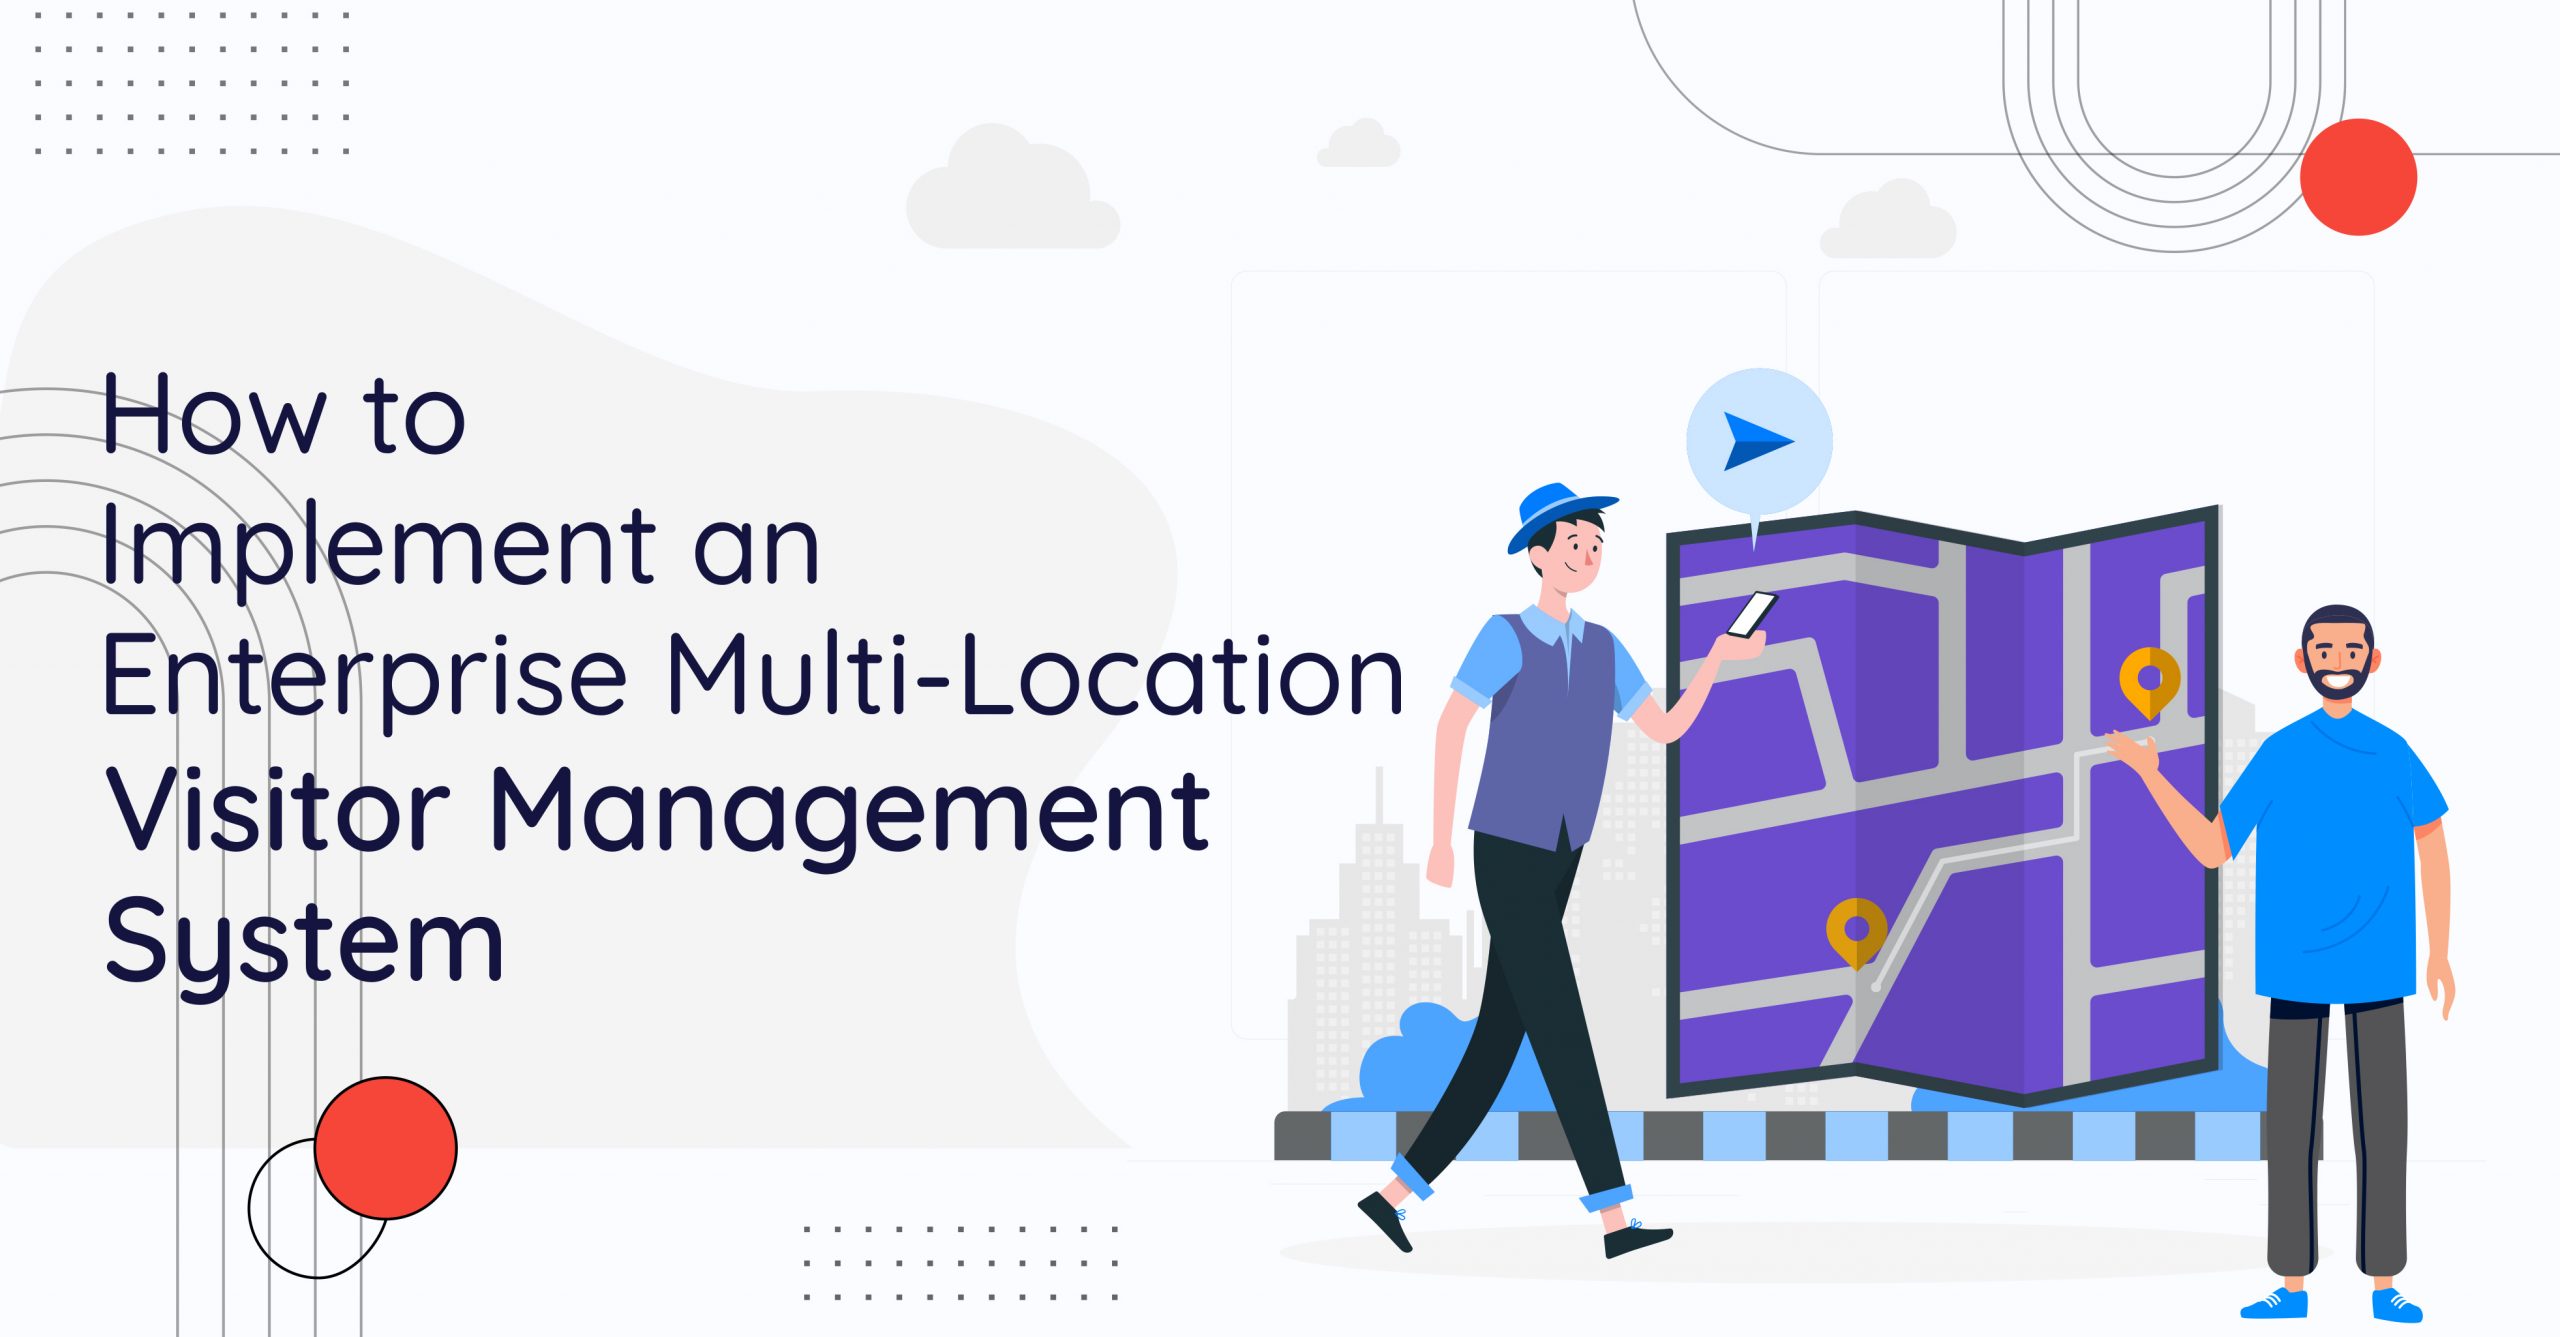 How to Implement an Enterprise Multi-Location Visitor Management System